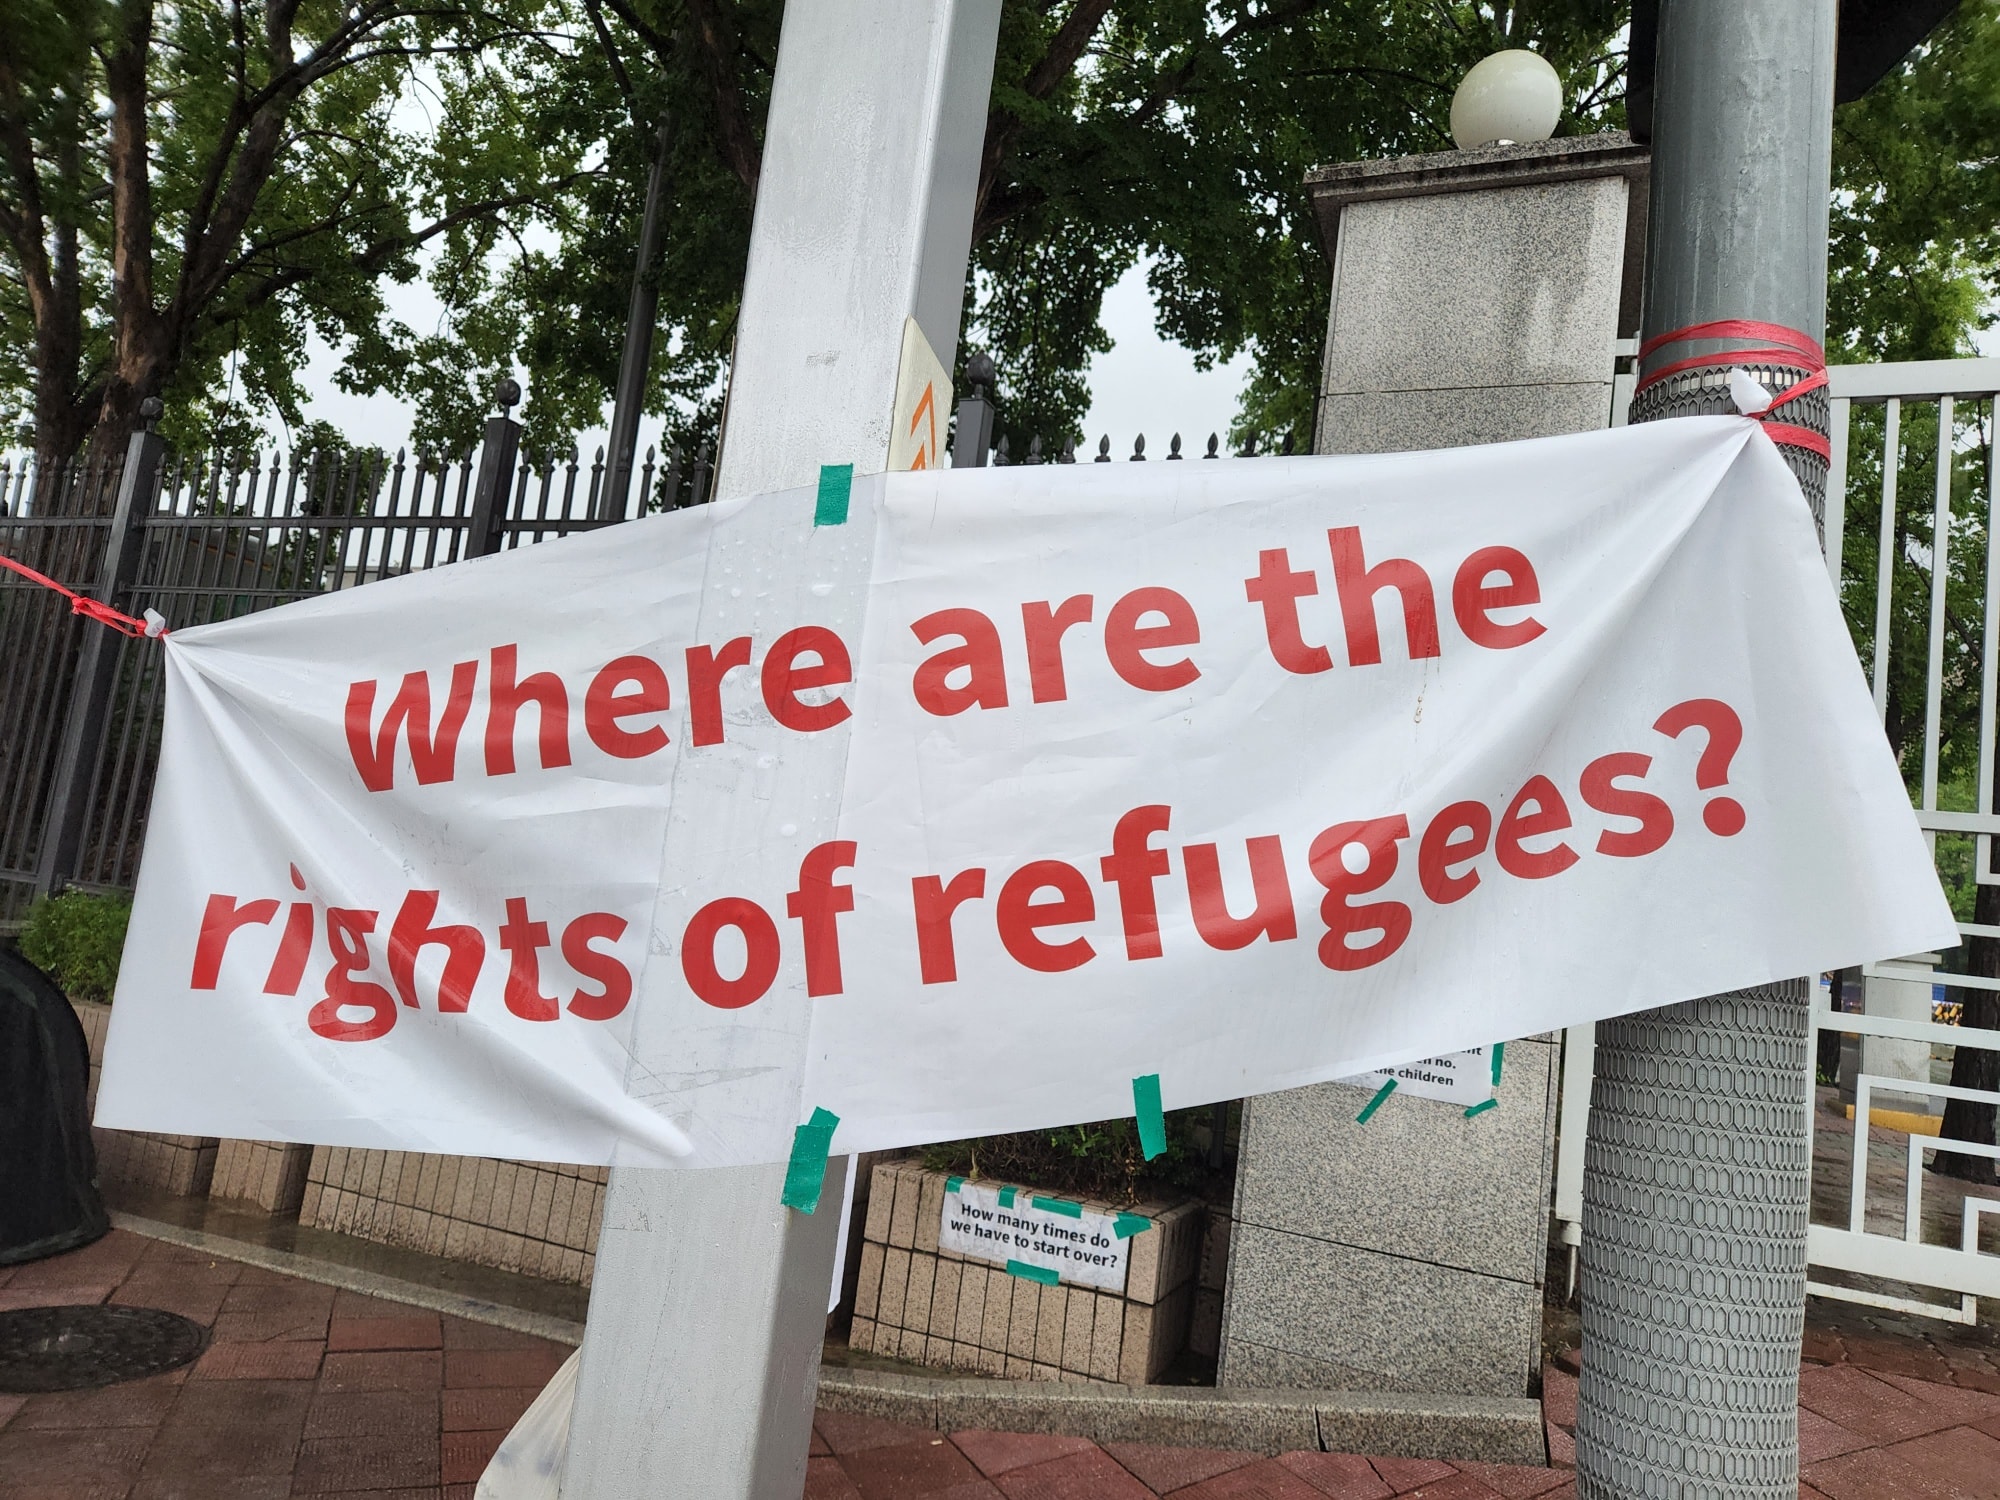 A banner, which says "Where are the rights of refugees?" in English in red, is hung by the NANCEN Refugee Rights Center's colleagues at the hunger strike space of a refugee family.